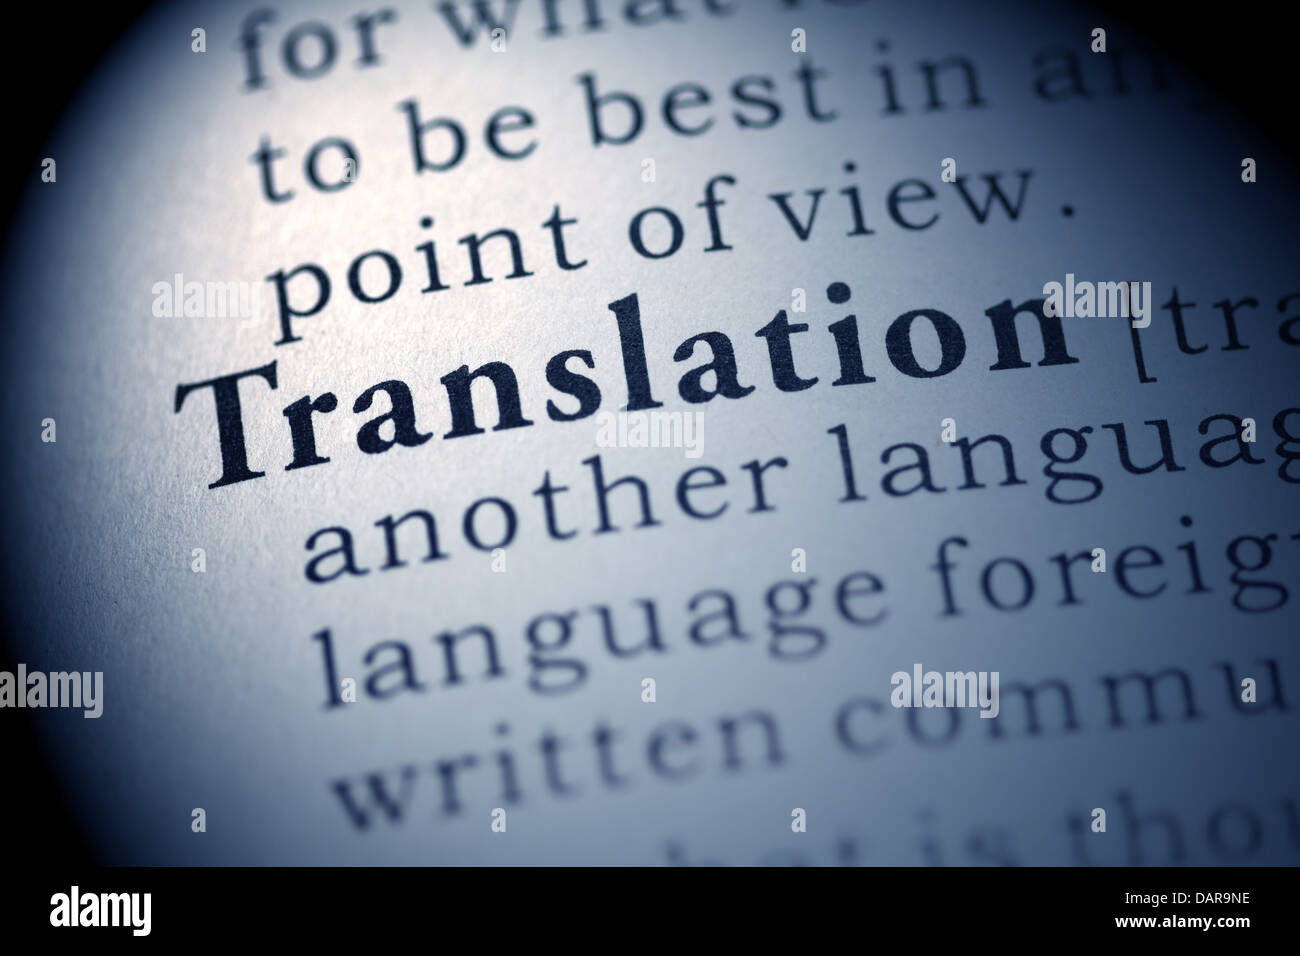 Fake Dictionary, Dictionary definition of the word Translation. Stock Photo